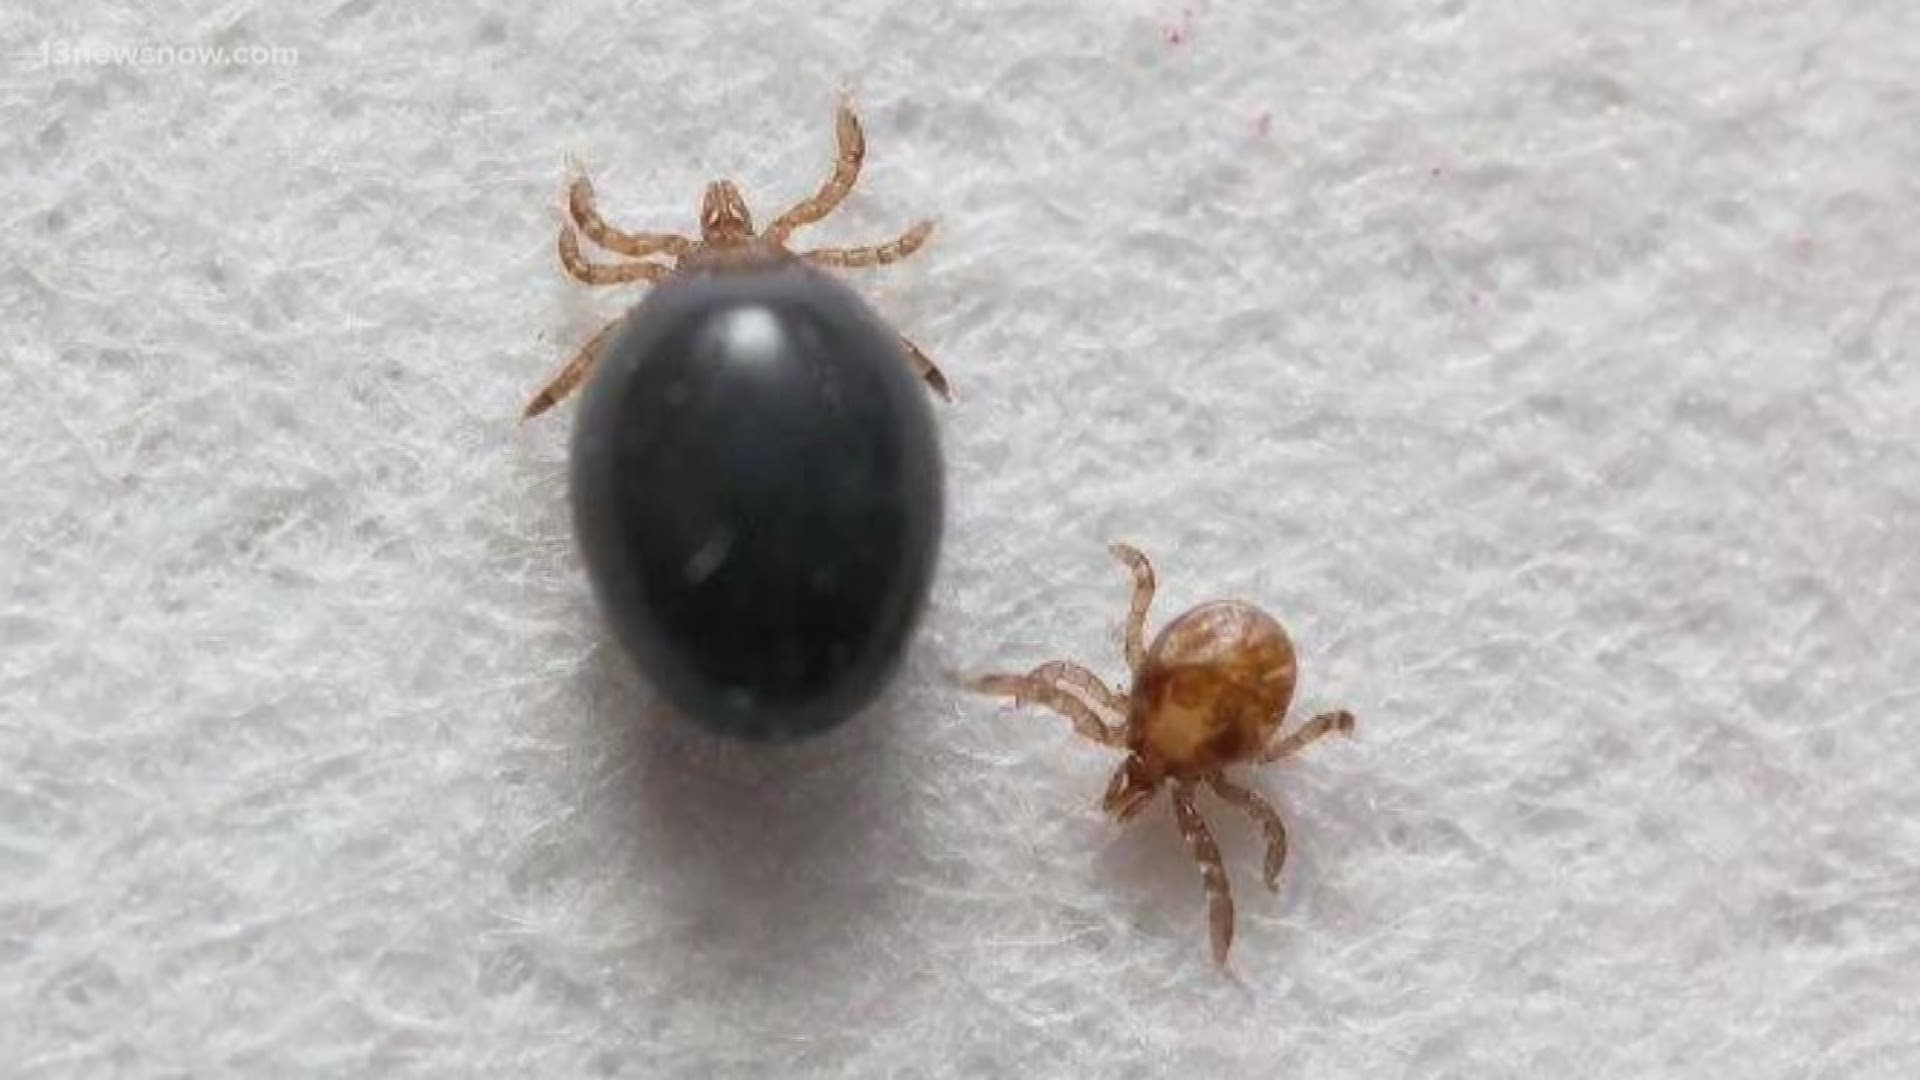 A bad tick year? Every year is a bad one, experts say